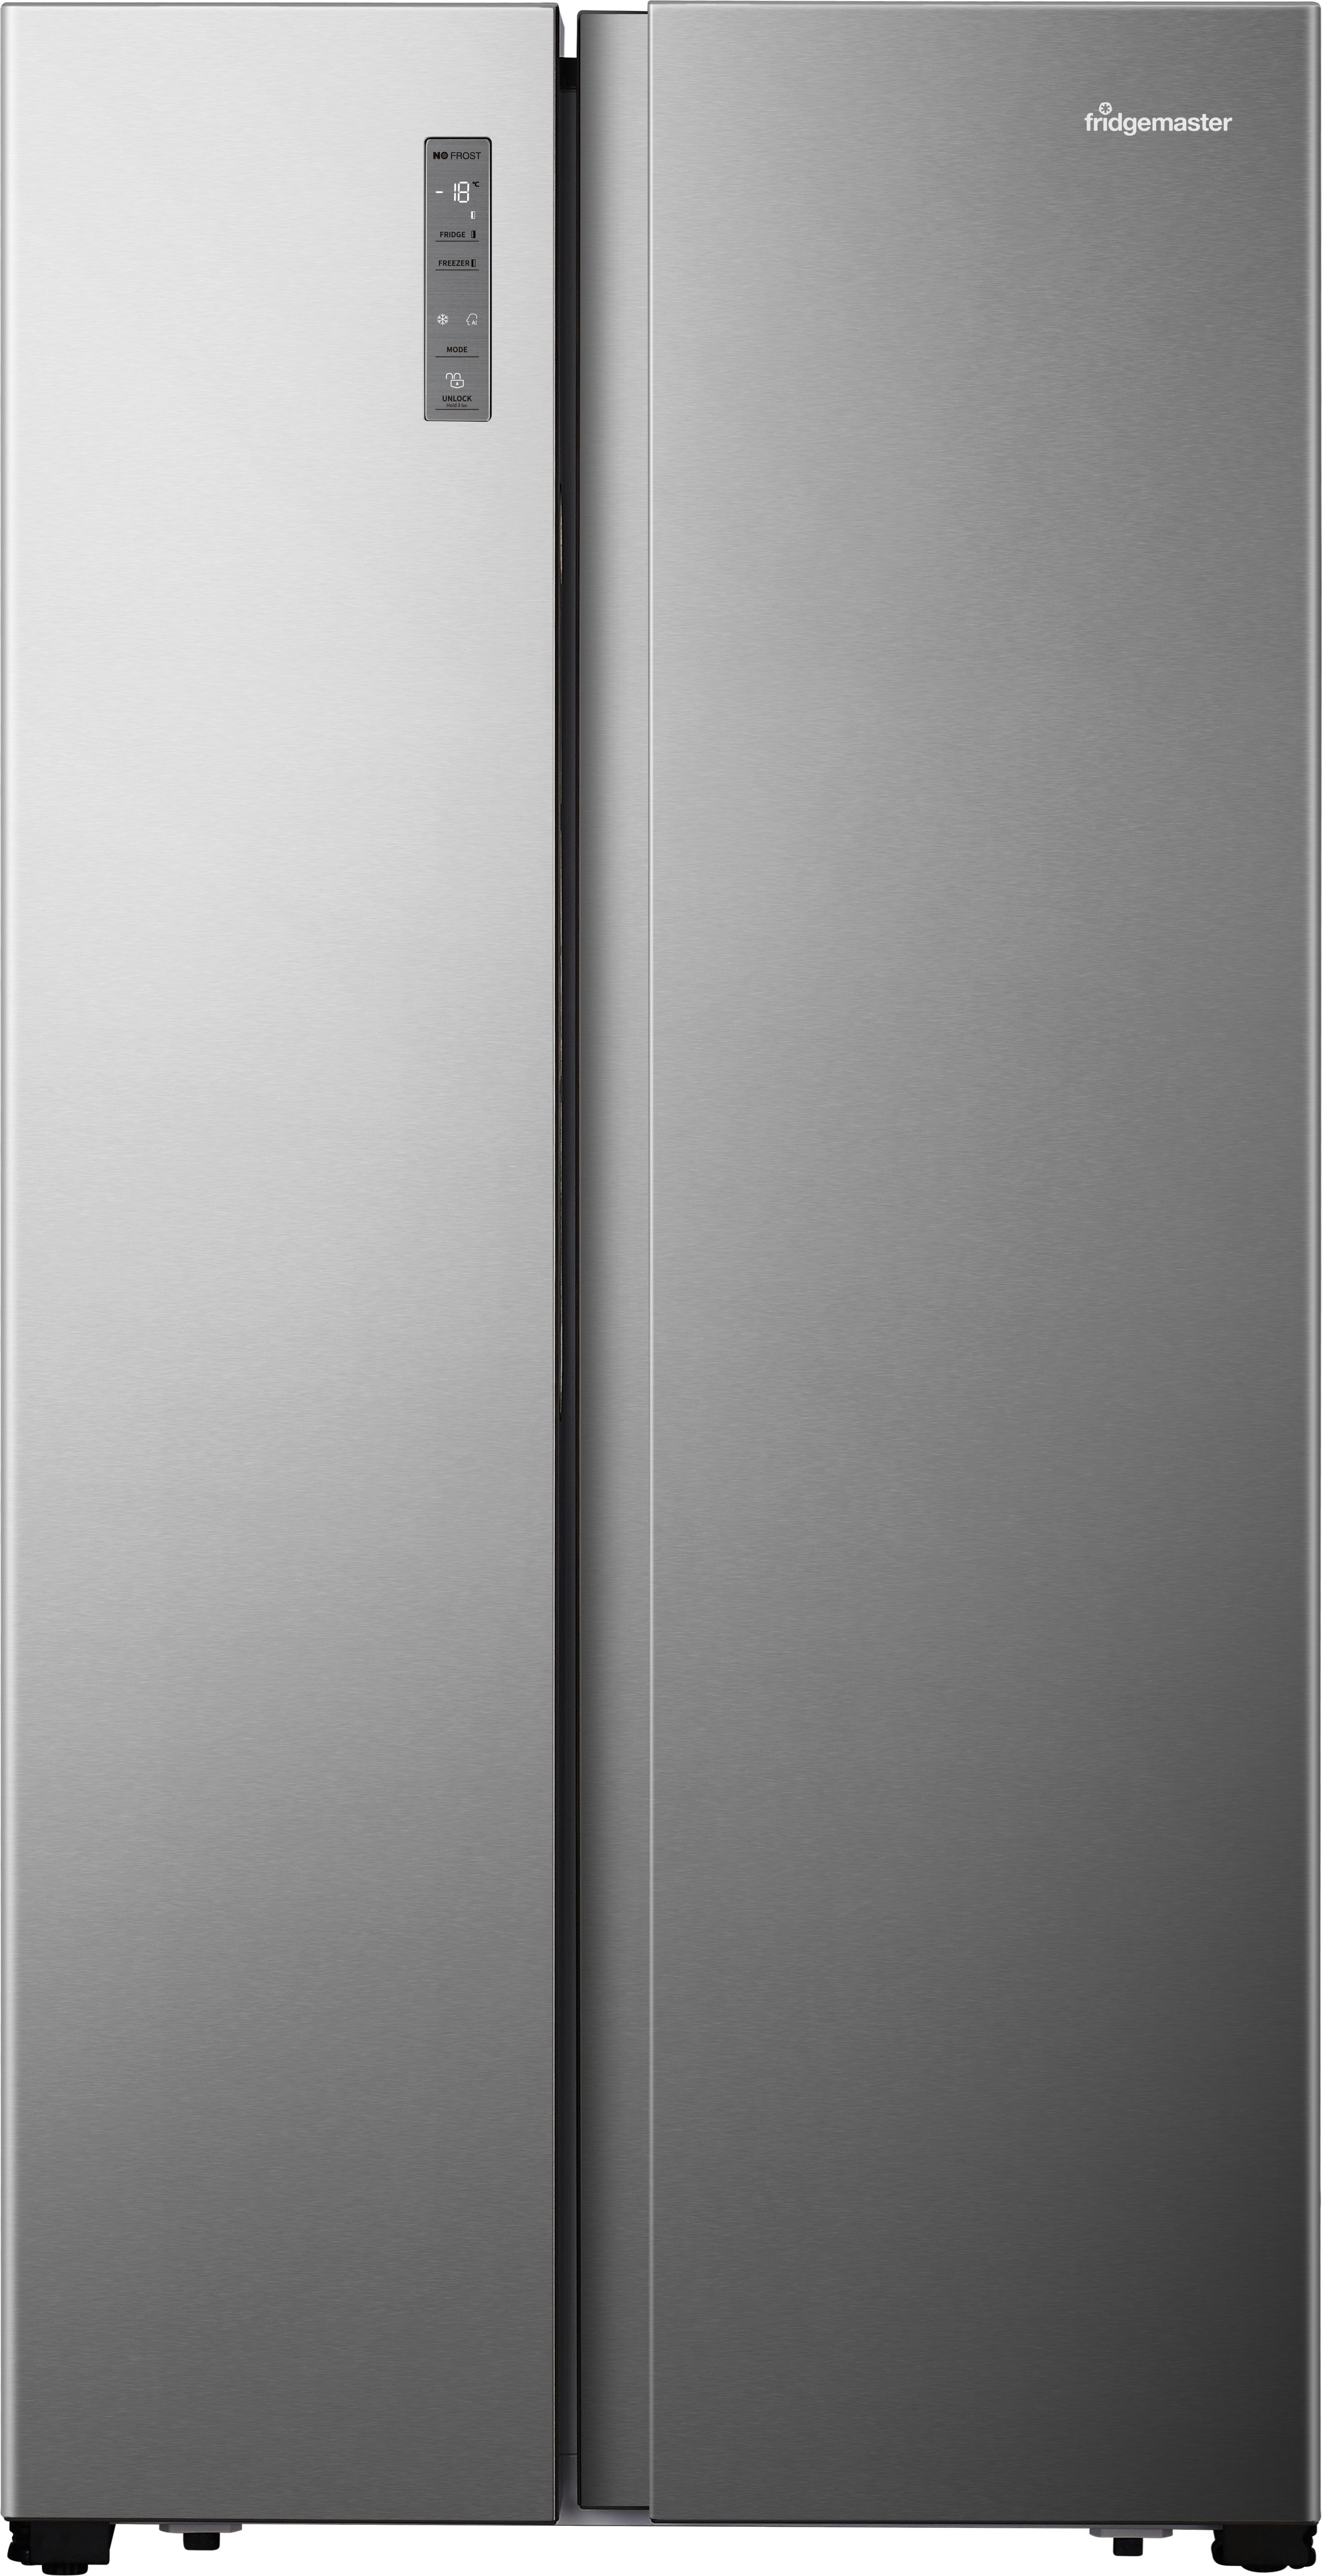 Fridgemaster MS91520ES Total No Frost American Fridge Freezer - Silver - E Rated, Silver